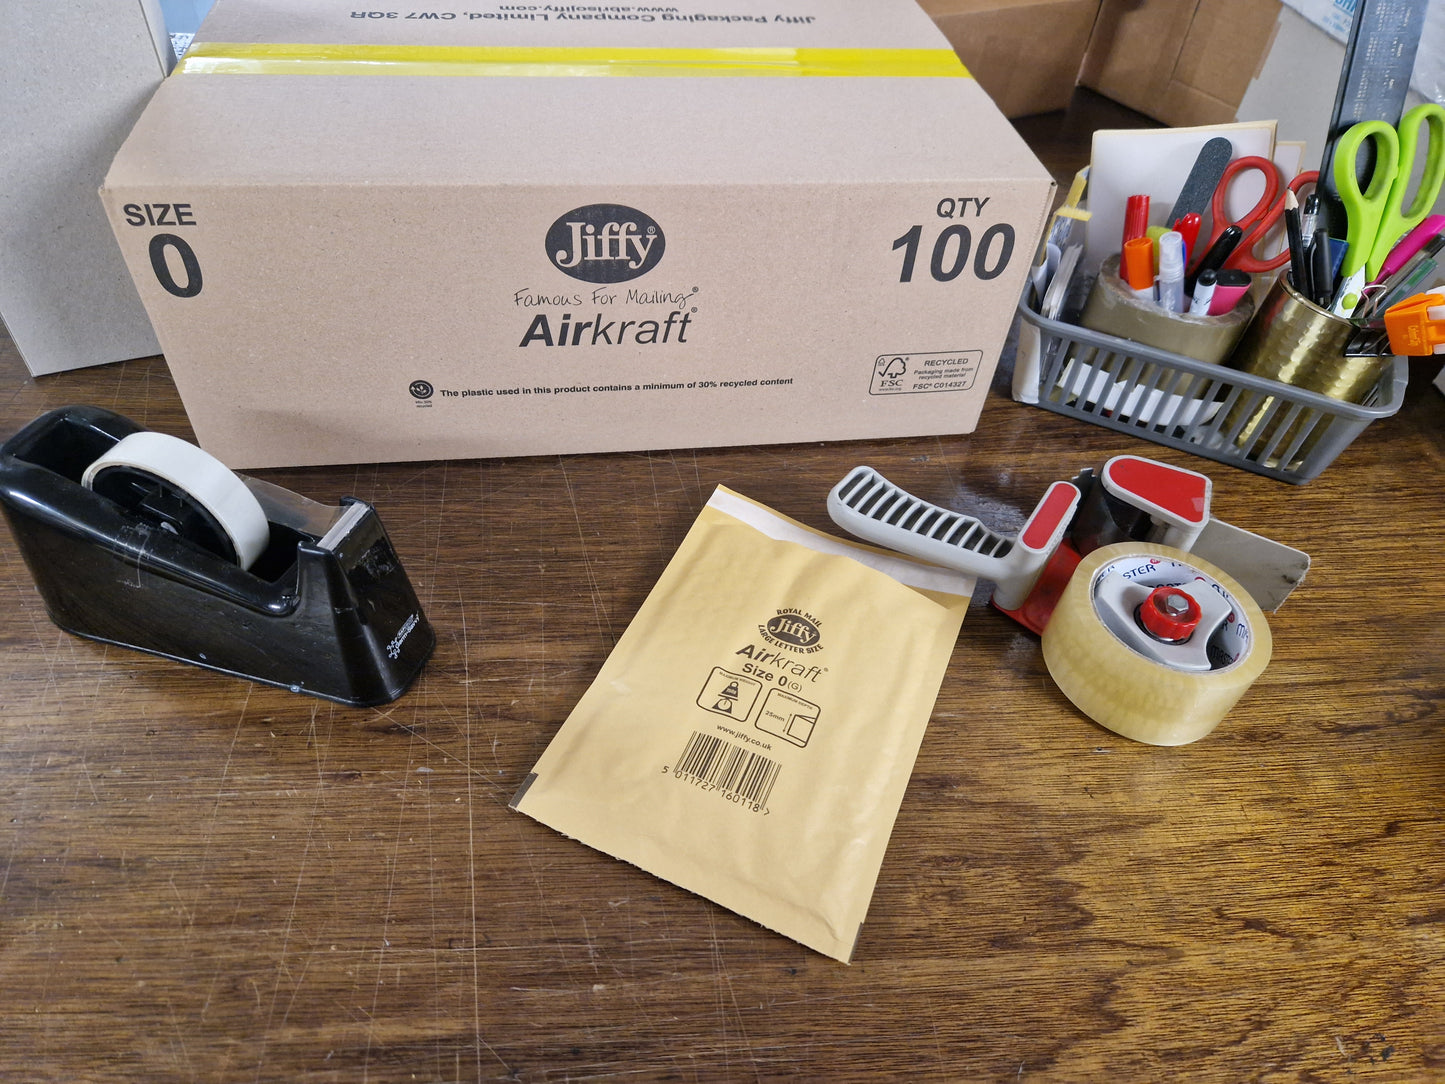 Box of Gold Jiffy airkraft JL0 from jiffy enevoples